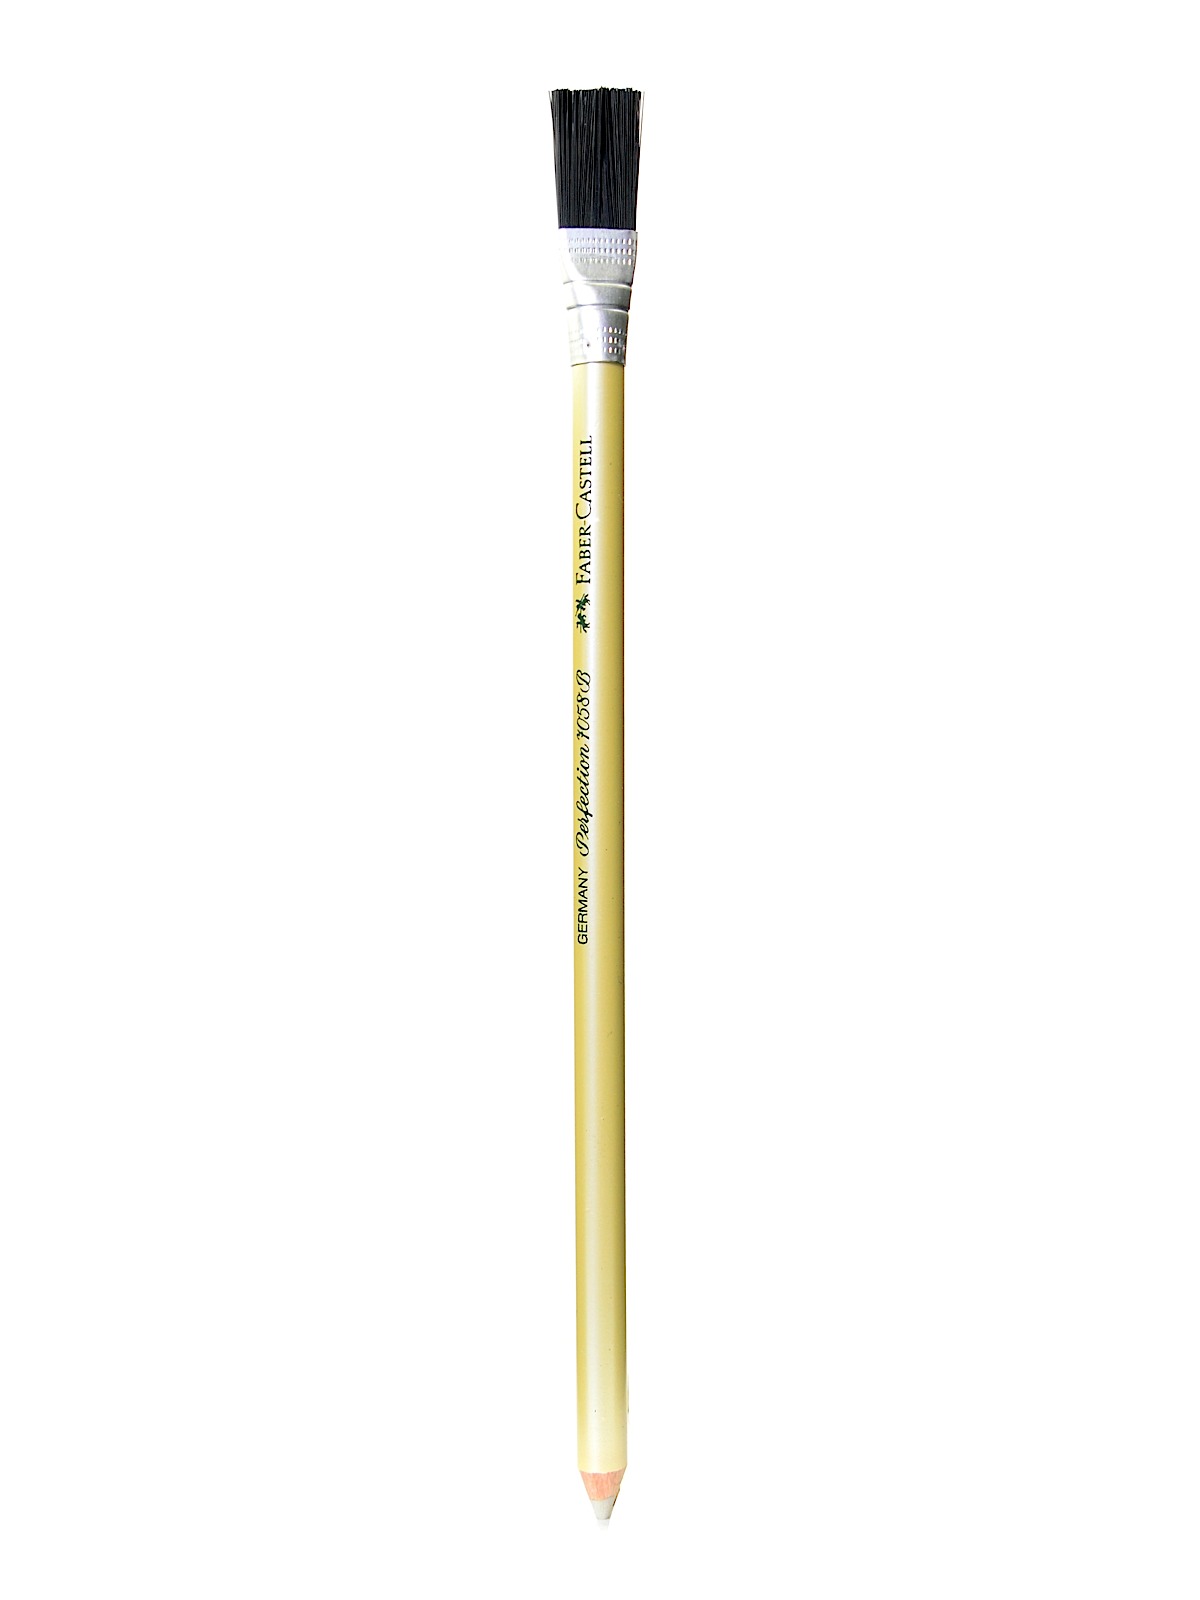 Perfection Eraser Pencil For Ink With Brush Eraser Pencil With Brush